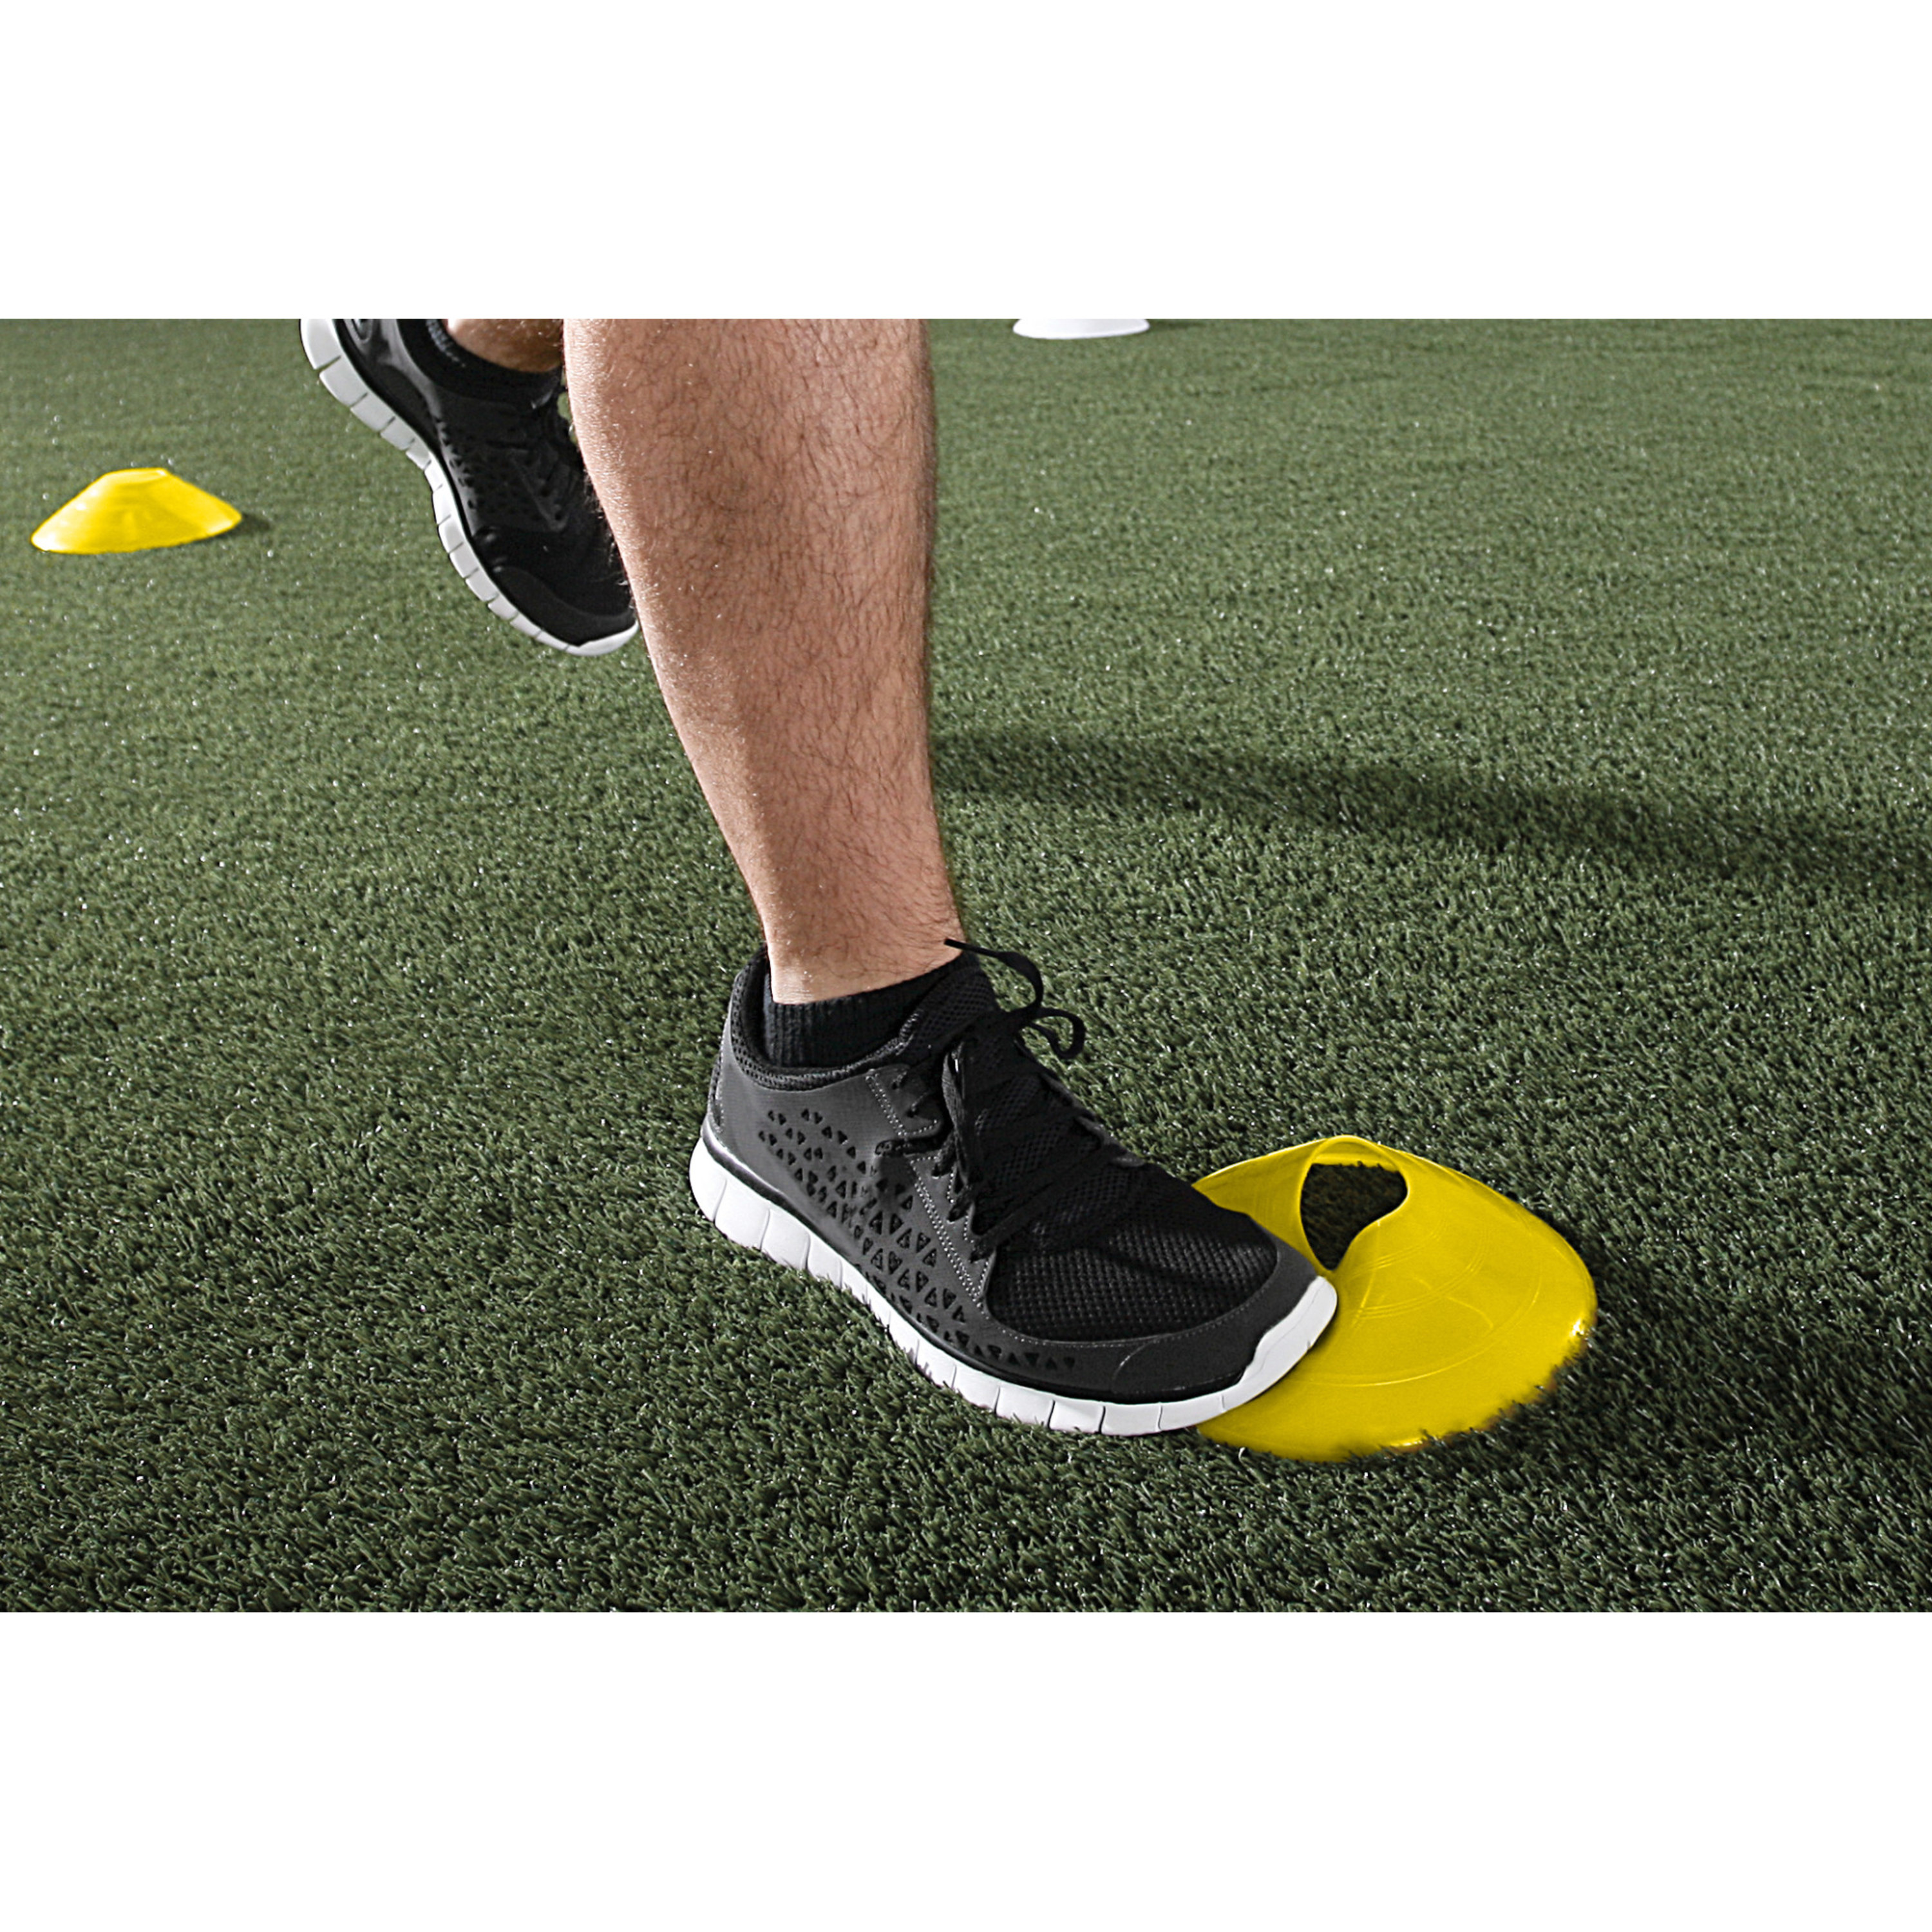 SKLZ Soccer Training Cone set for speed, quickness and agility training, includes 20 cones in 4 colors - image 4 of 6